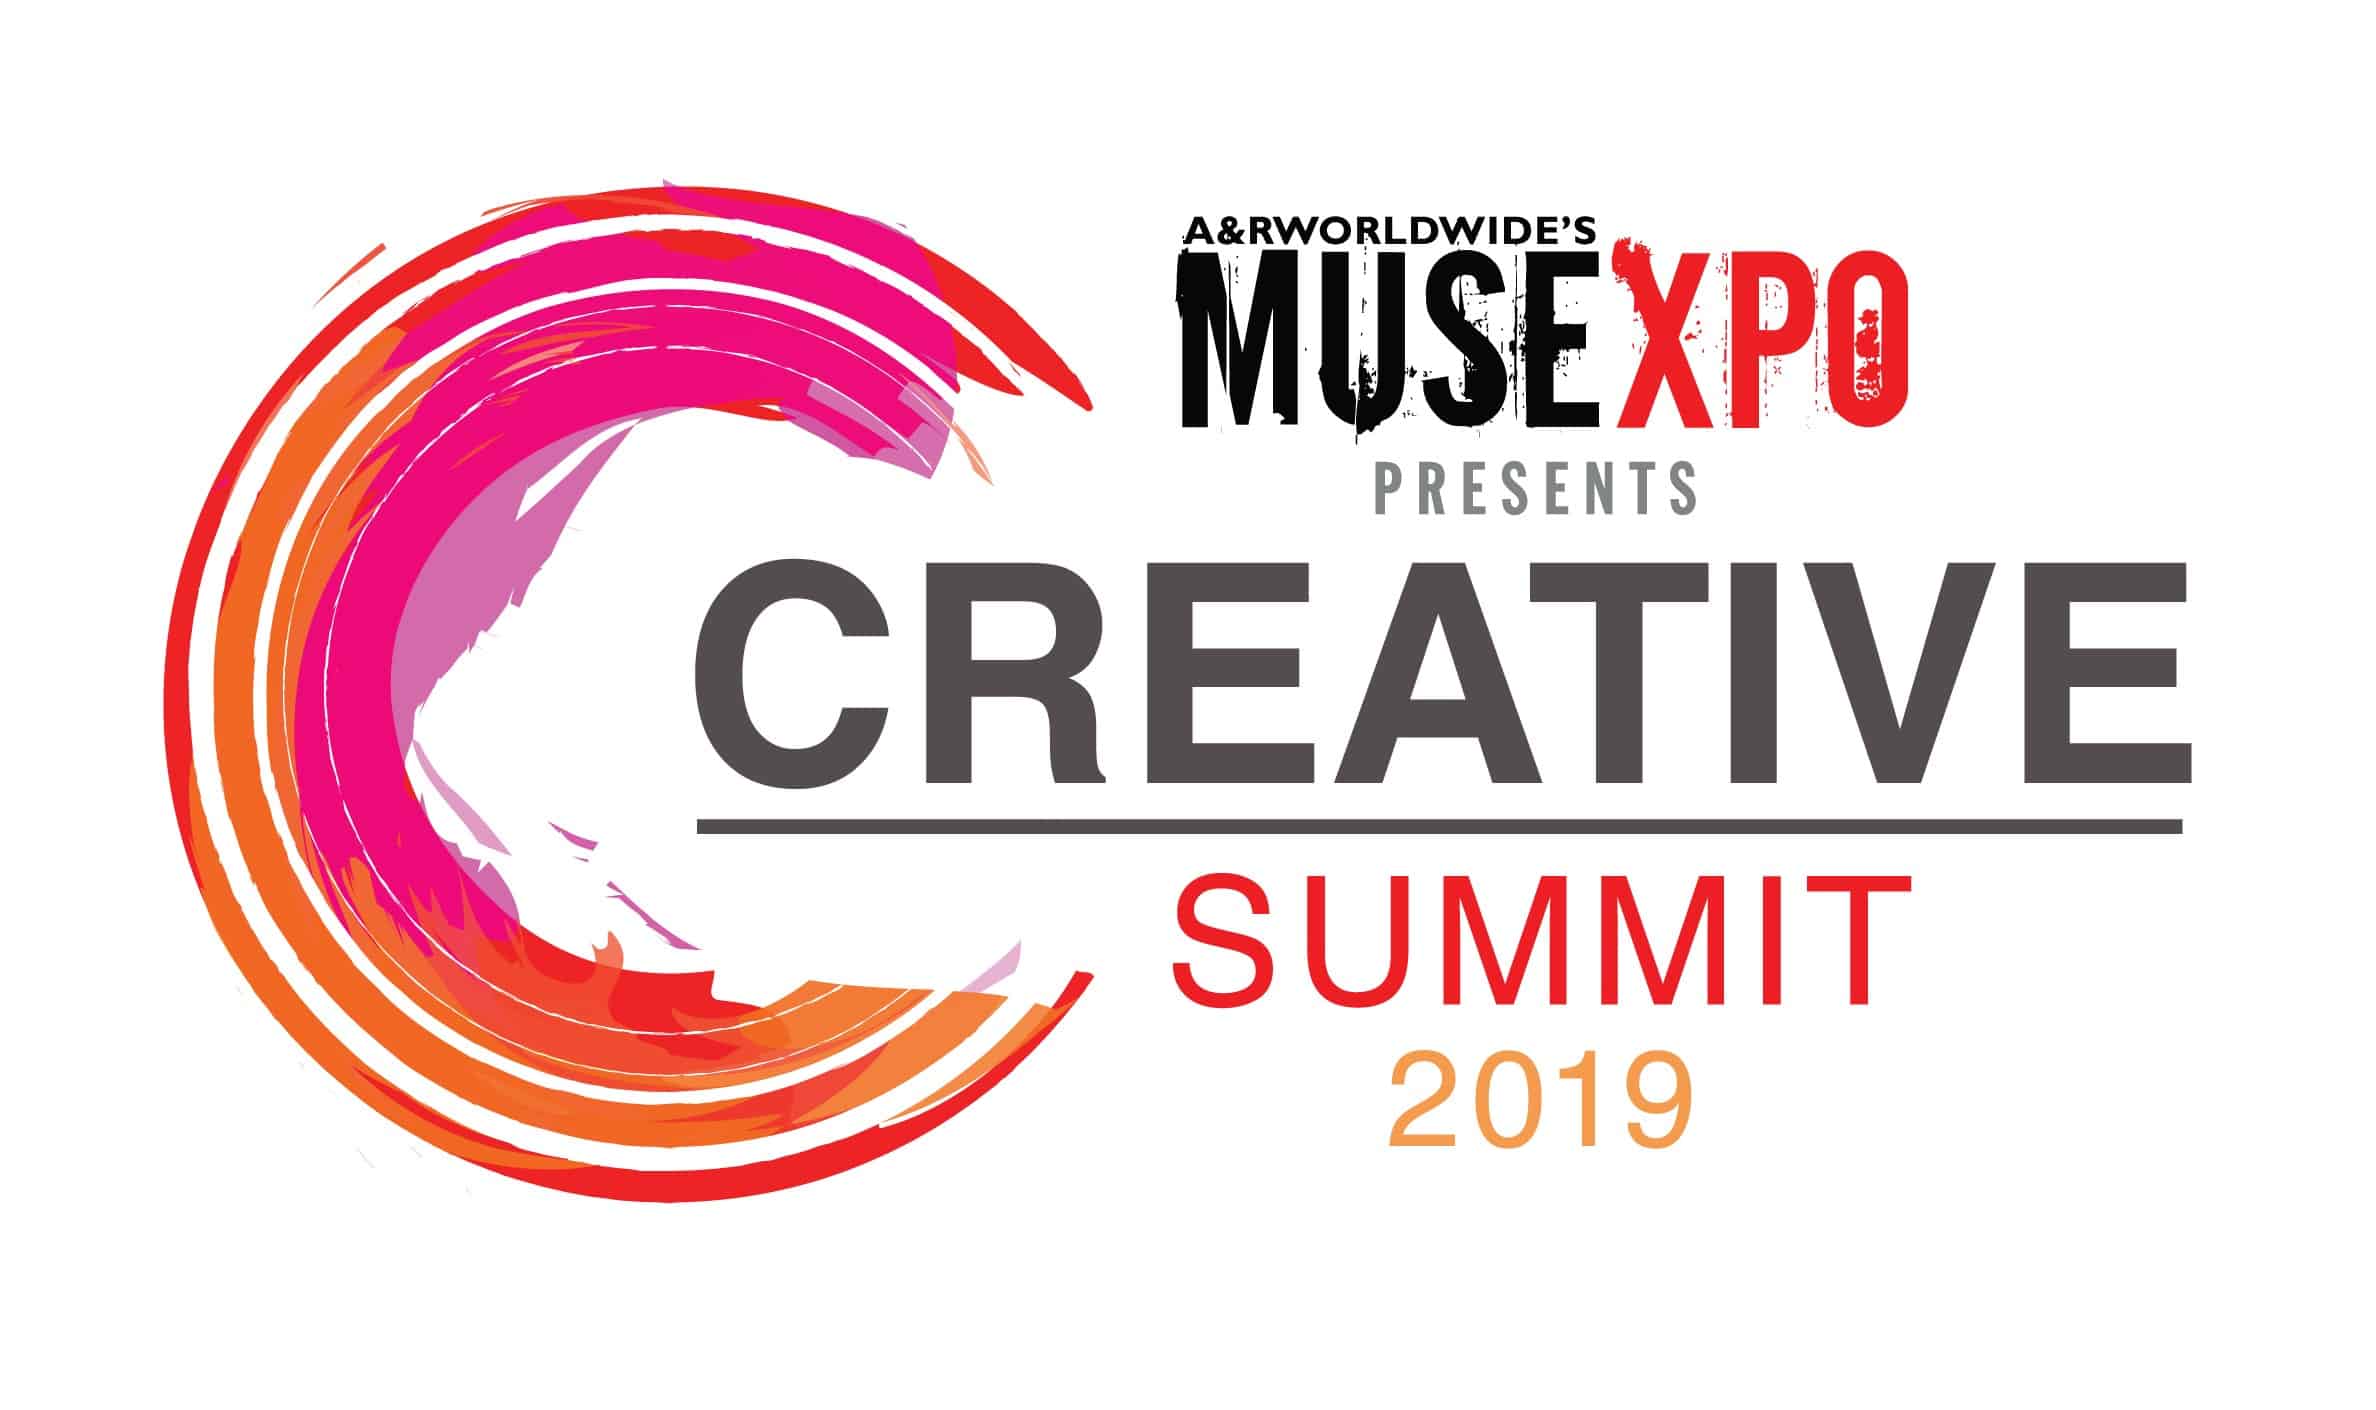 MUSEXPO Creative Summit 2019 (LA, March 24th-27th) Focuses On Sync, Licensing